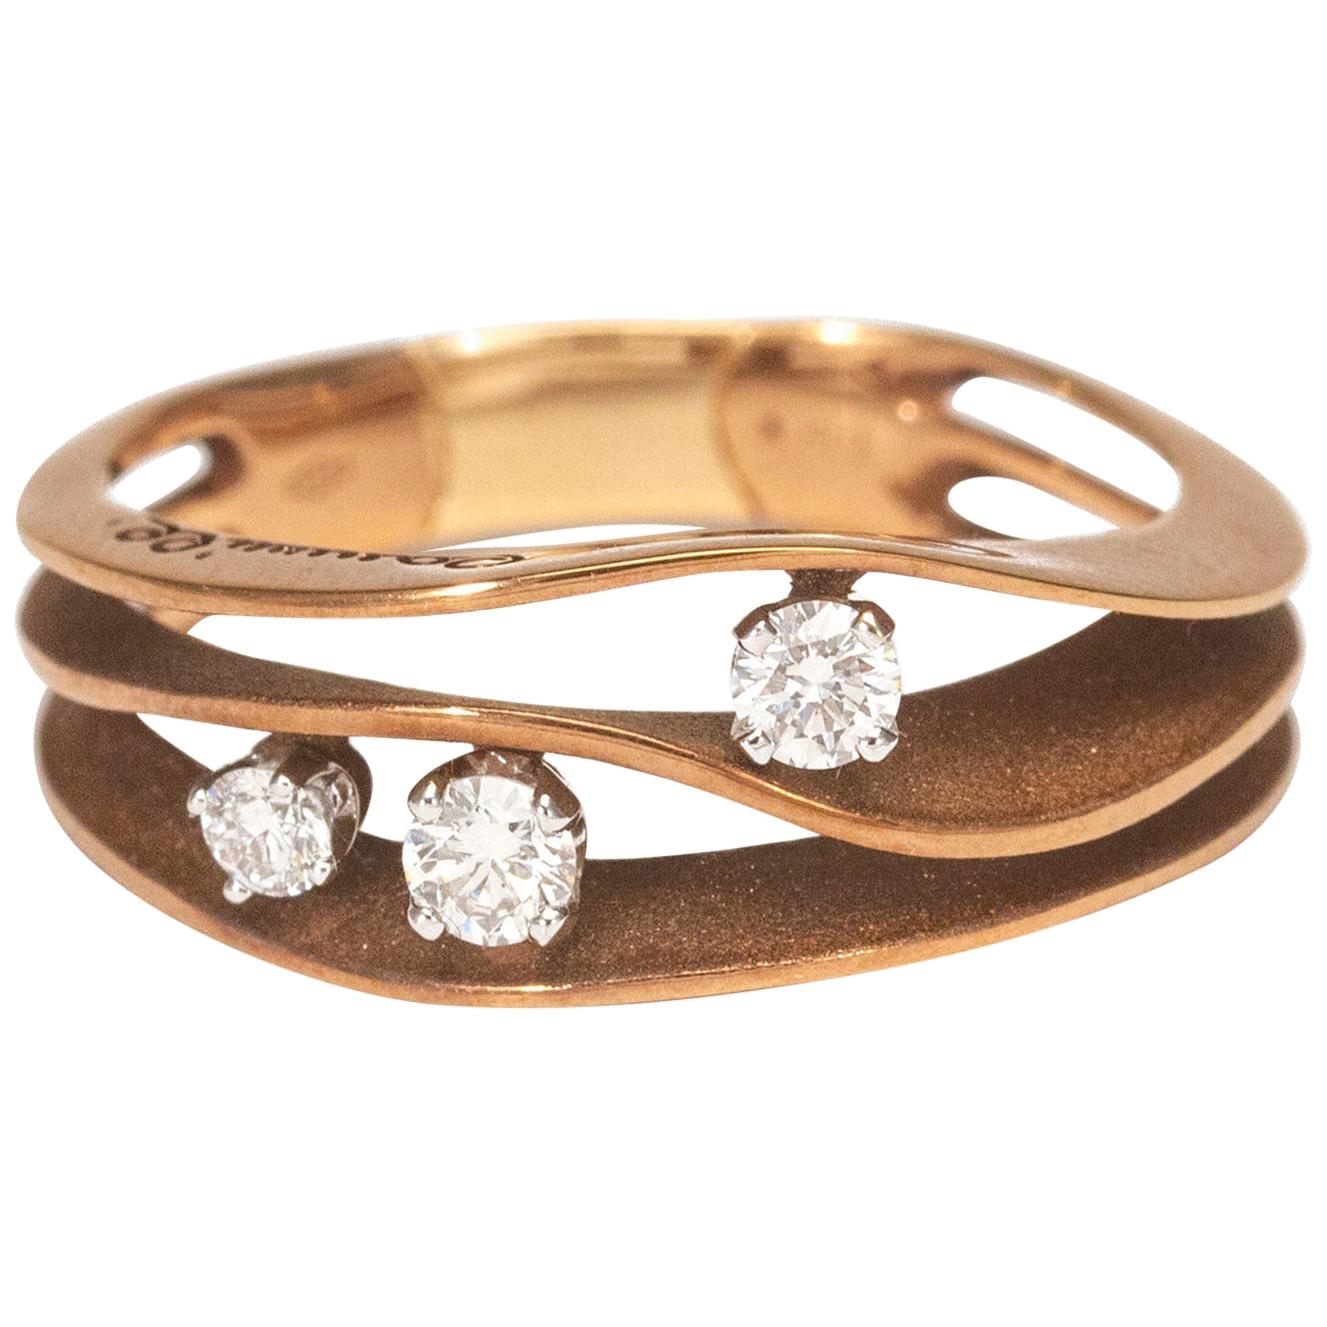 For Sale:  Annamaria Cammilli "Dune" Ring with Three Diamonds in 18k Brown Chocolate Gold